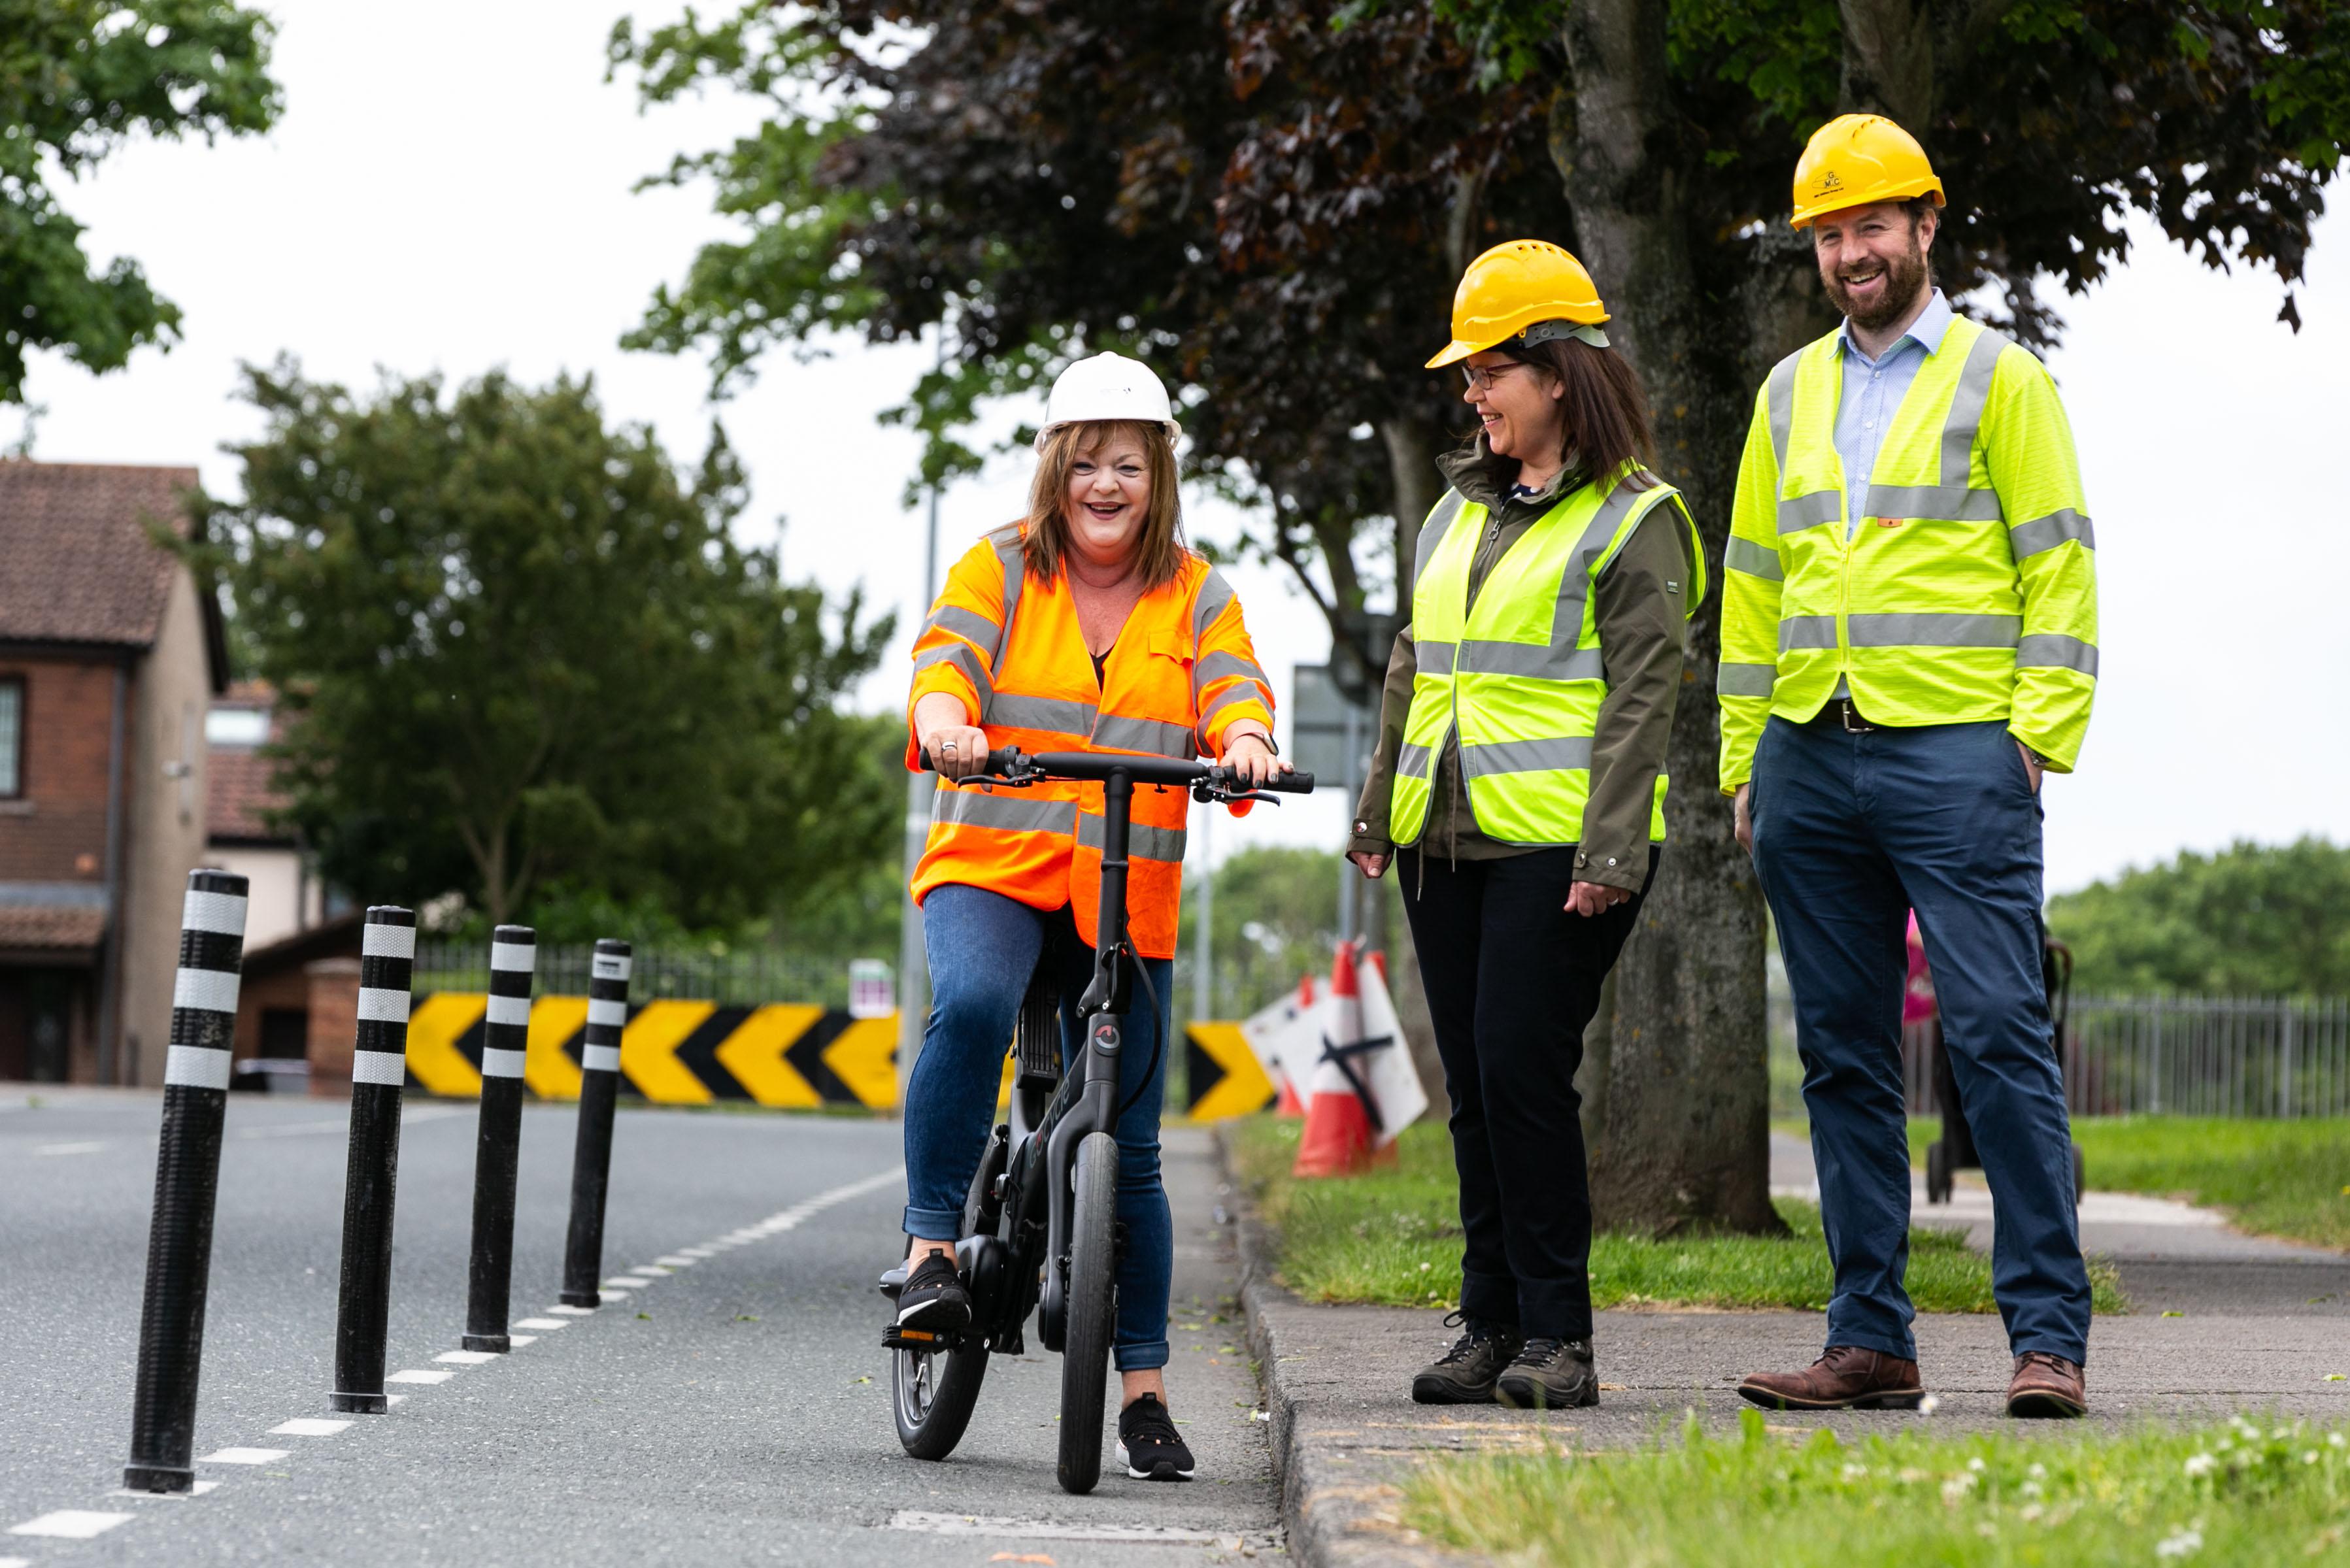 Woman in hard hat on bike with woman and man standing beside her